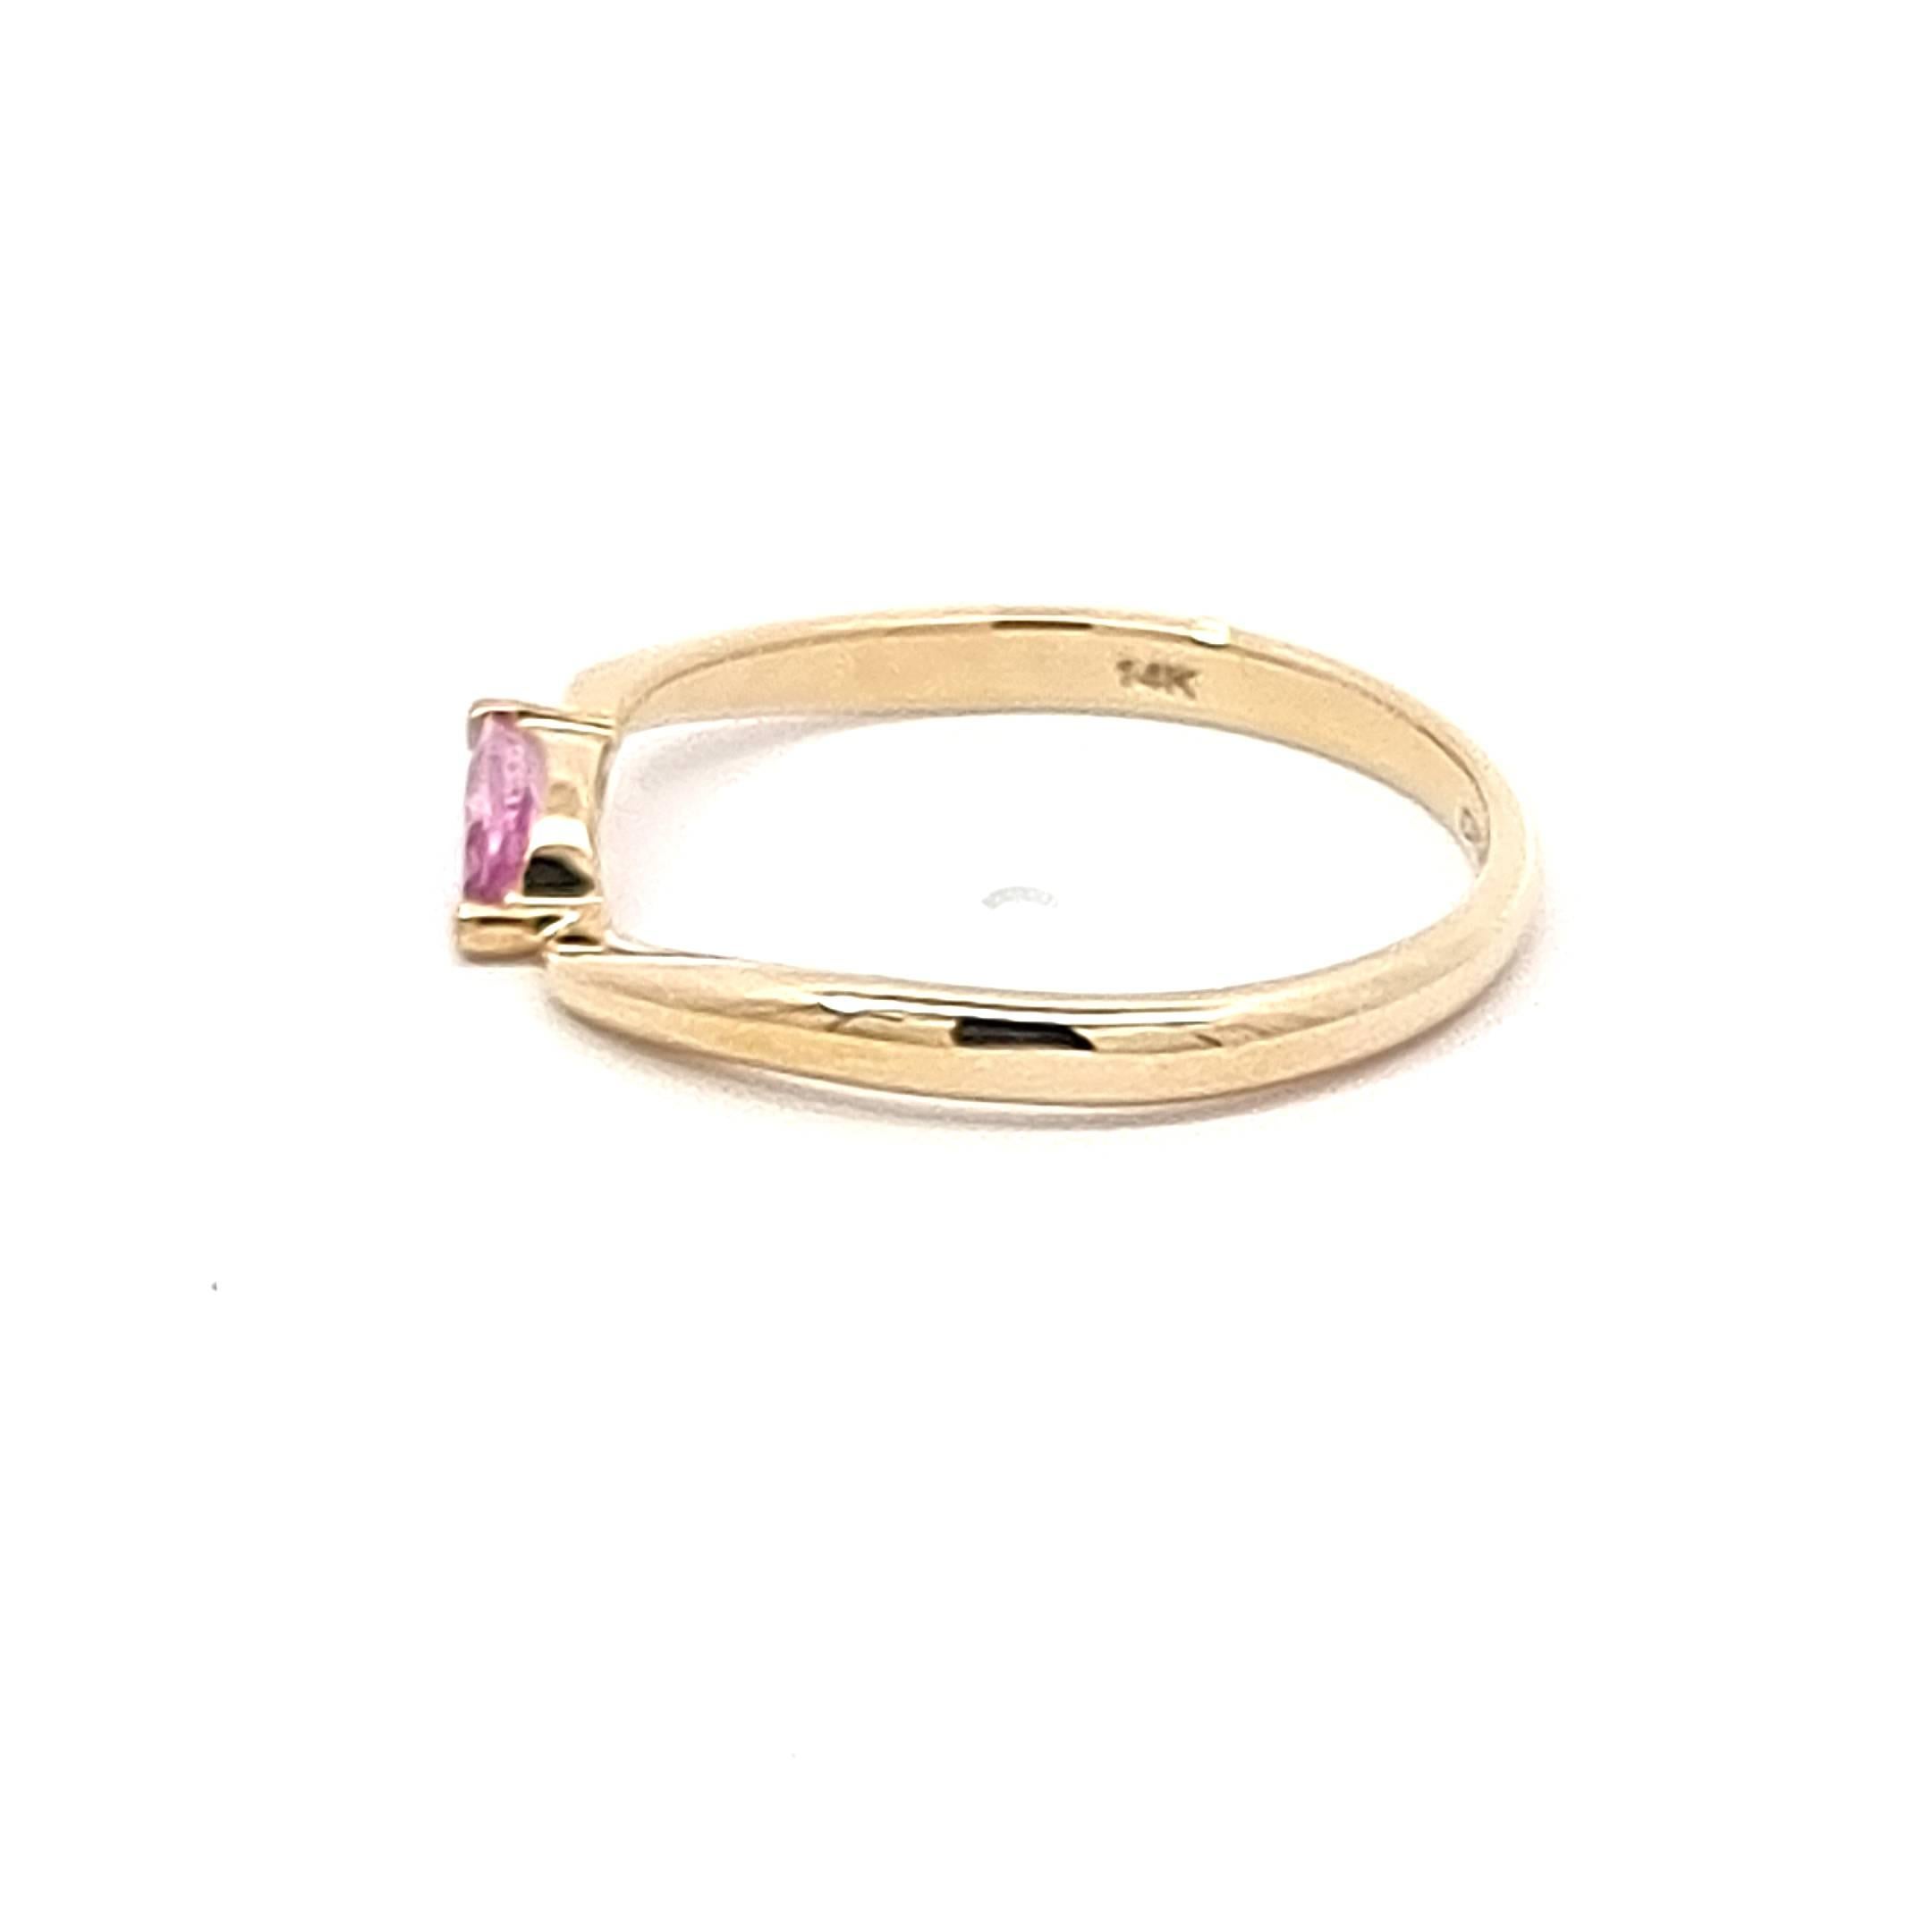 Step into a world of enchantment with our 14K Yellow Gold Ring, a celebration of delicate beauty and sophistication. The centerpiece, a mesmerizing pink marquise sapphire weighing 0.27 carats, emanates a soft, rosy glow that captures the essence of